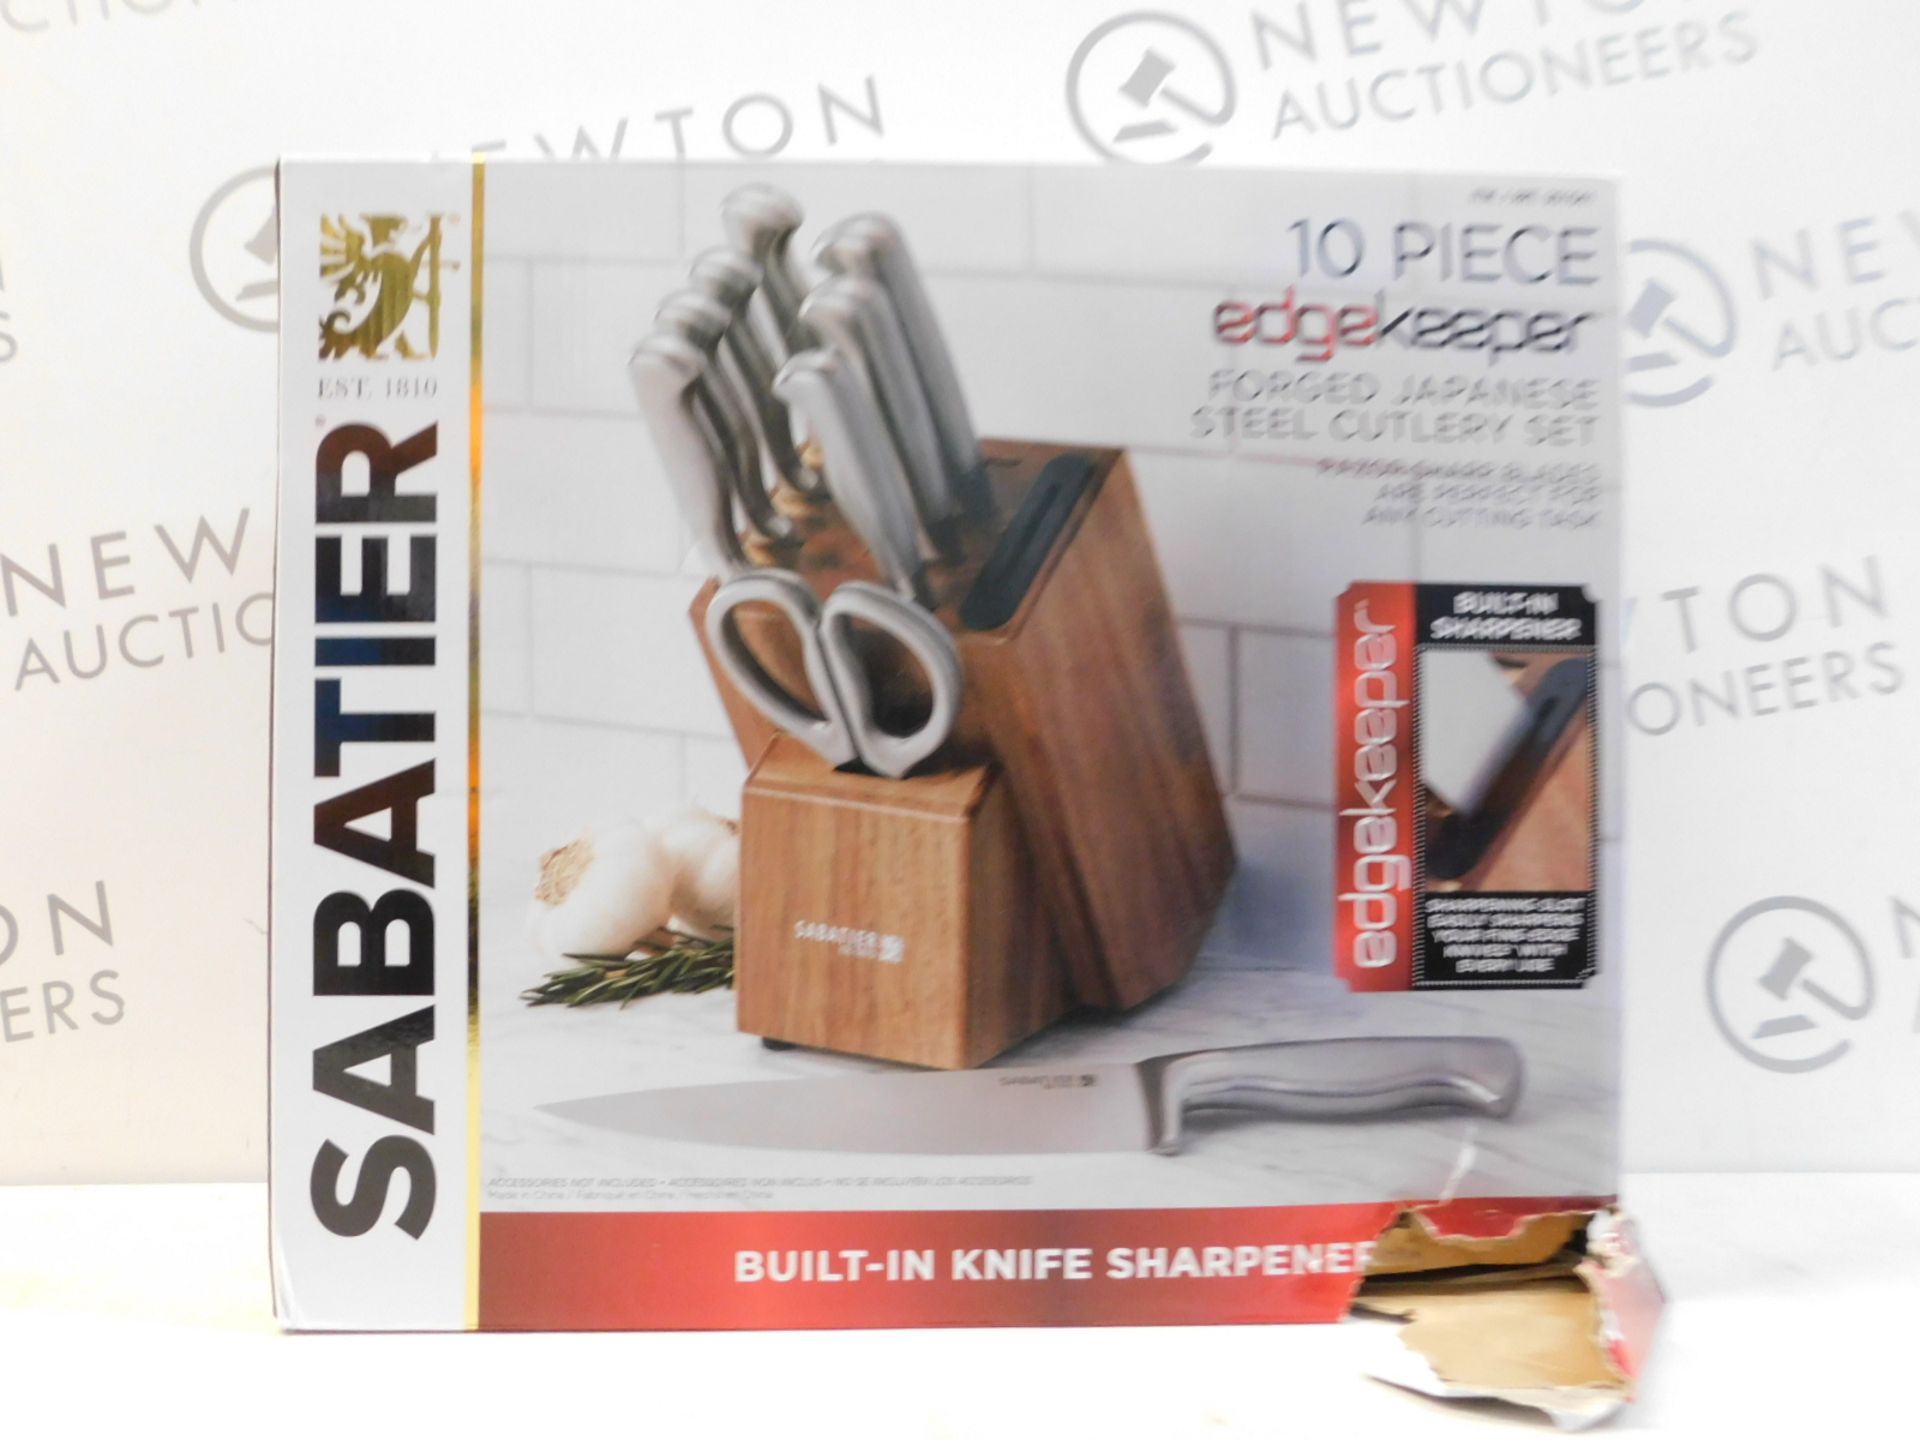 1 BOXED SABATIER 10PC EDGE KEEPER FORED JAPANESE STEEL KNIFE SET WITH ACACIA WOOD BLOCK RRP Â£119. - Image 2 of 2